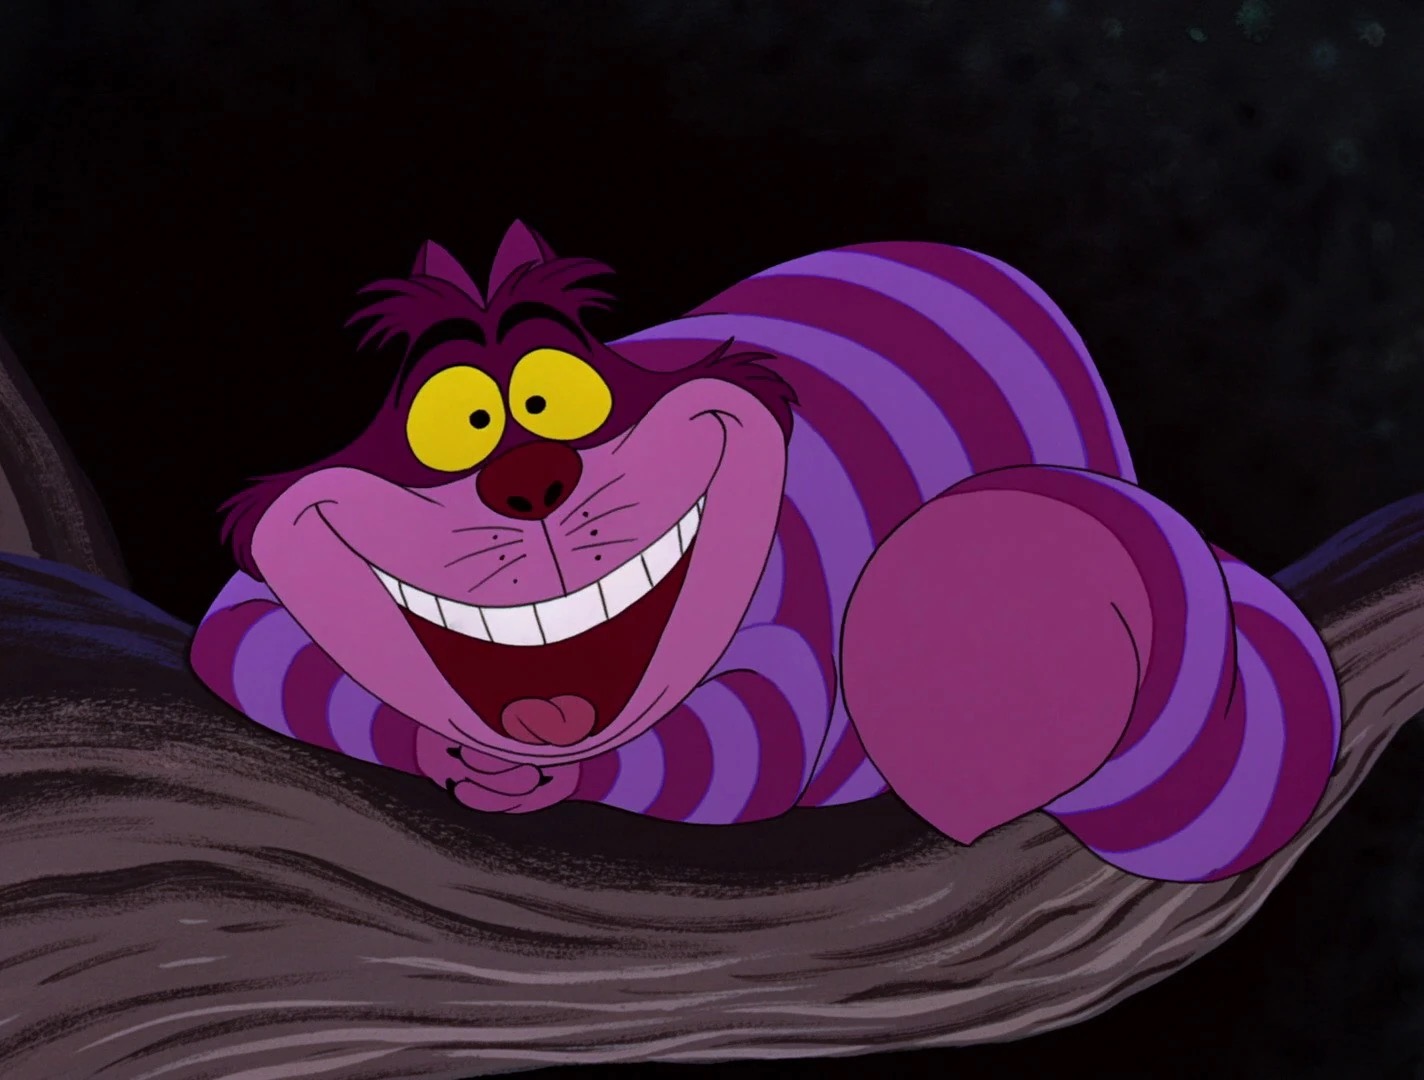 20 Trivia Questions & Answers From Games To Greek Myths Quiz Cheshire Cat